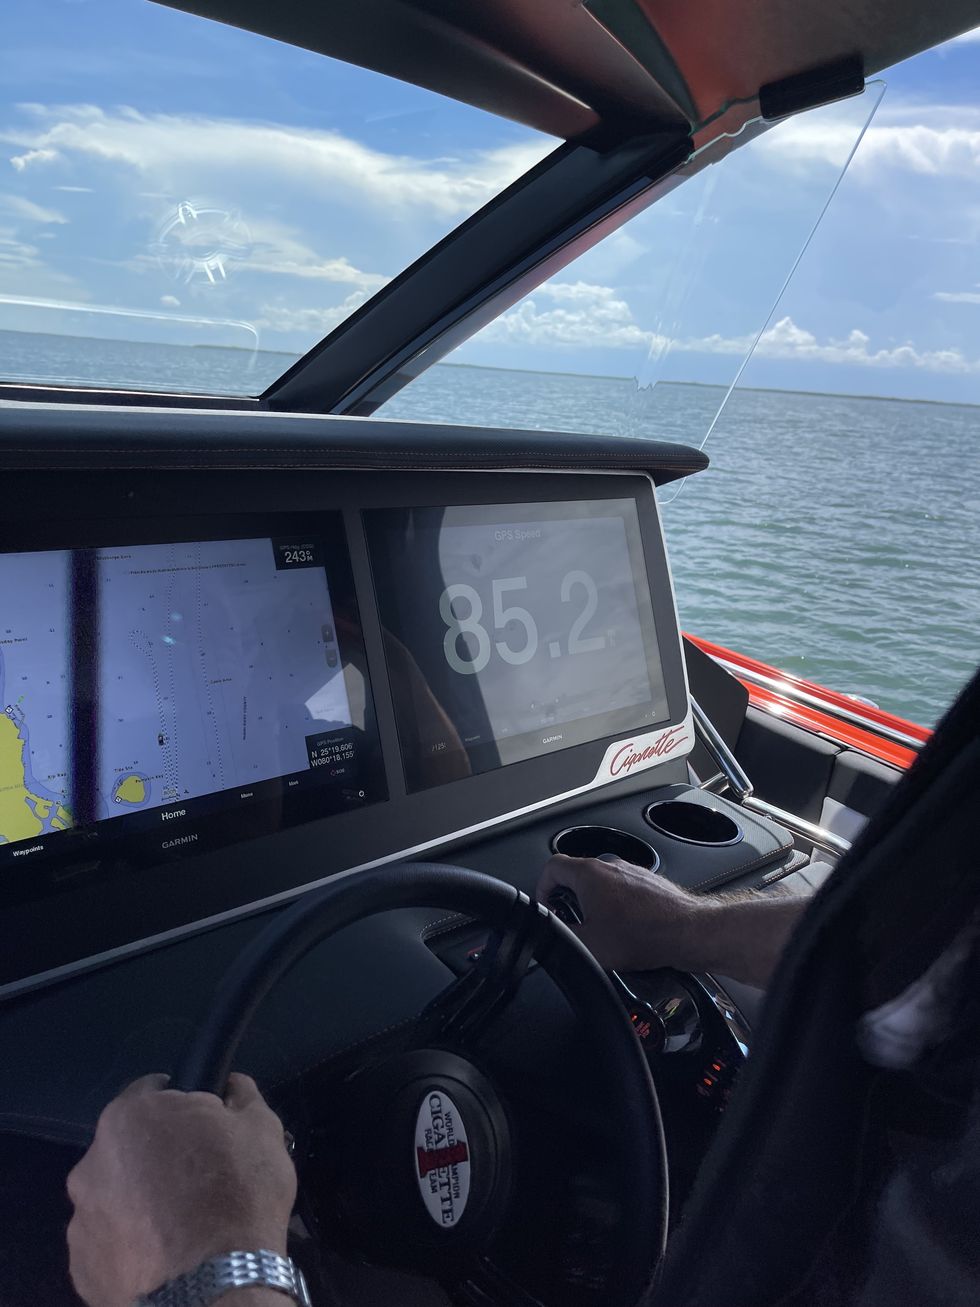 gps screen showing a boat going 852 mph